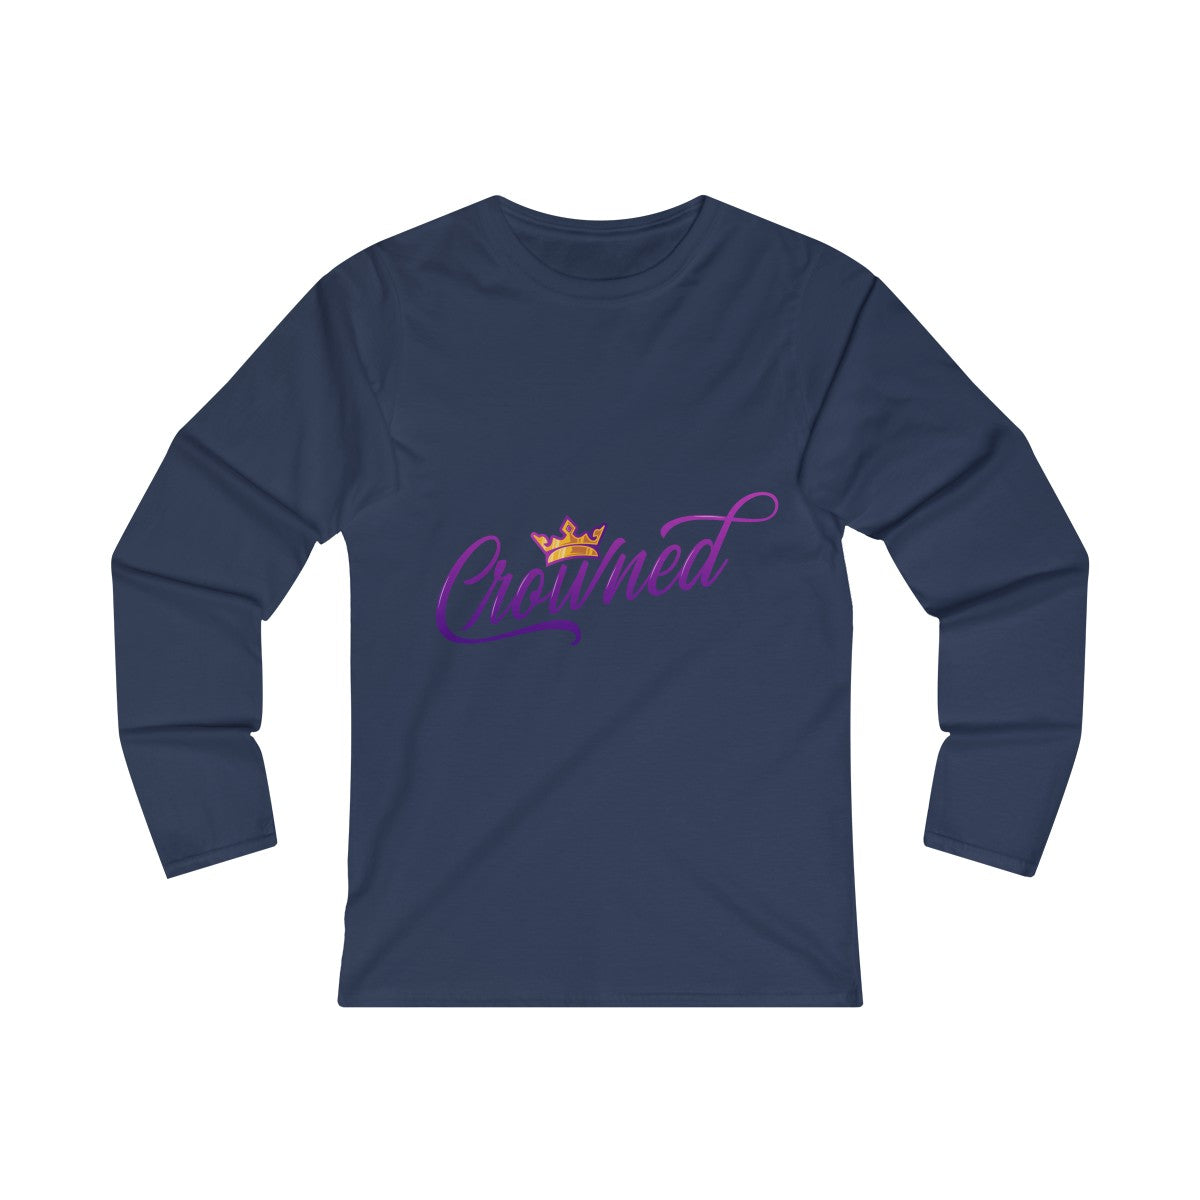 Crowned Women's Fitted Long Sleeve Tee